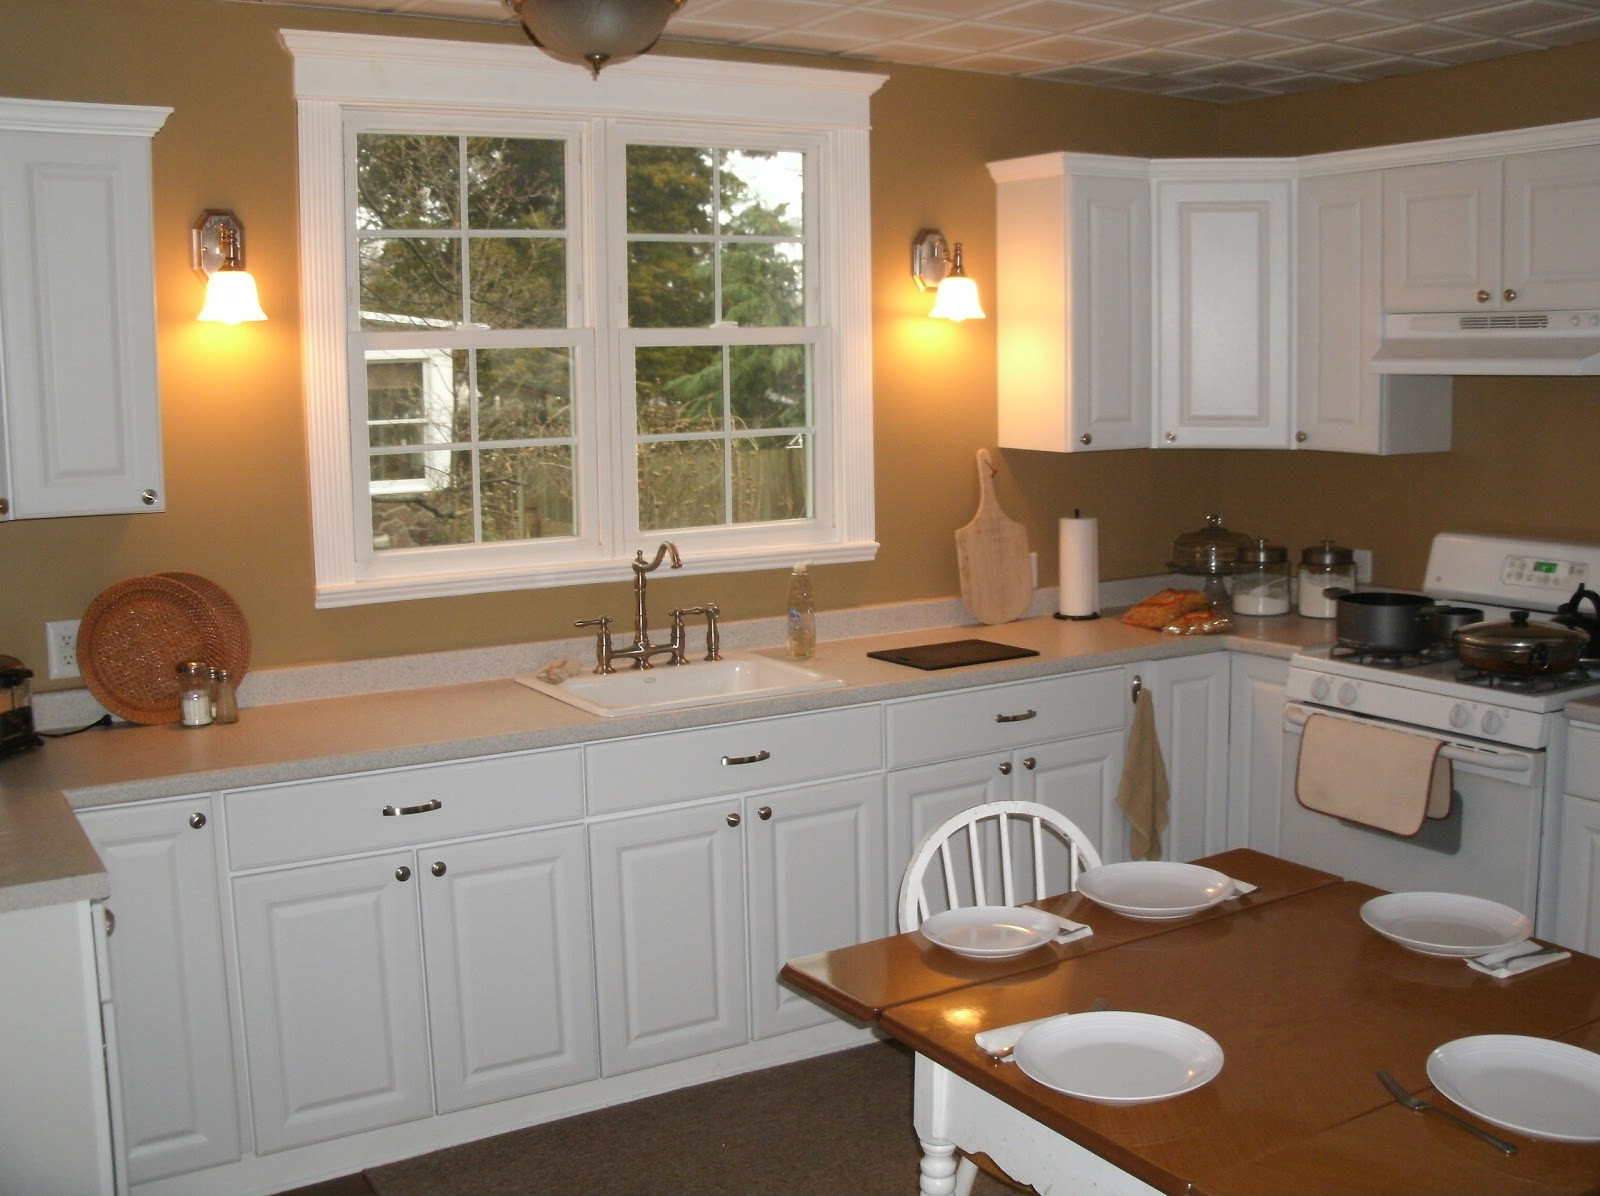 Kitchen Remodel Ideas
 plete Home Remodeling and Construction 856 956 6425